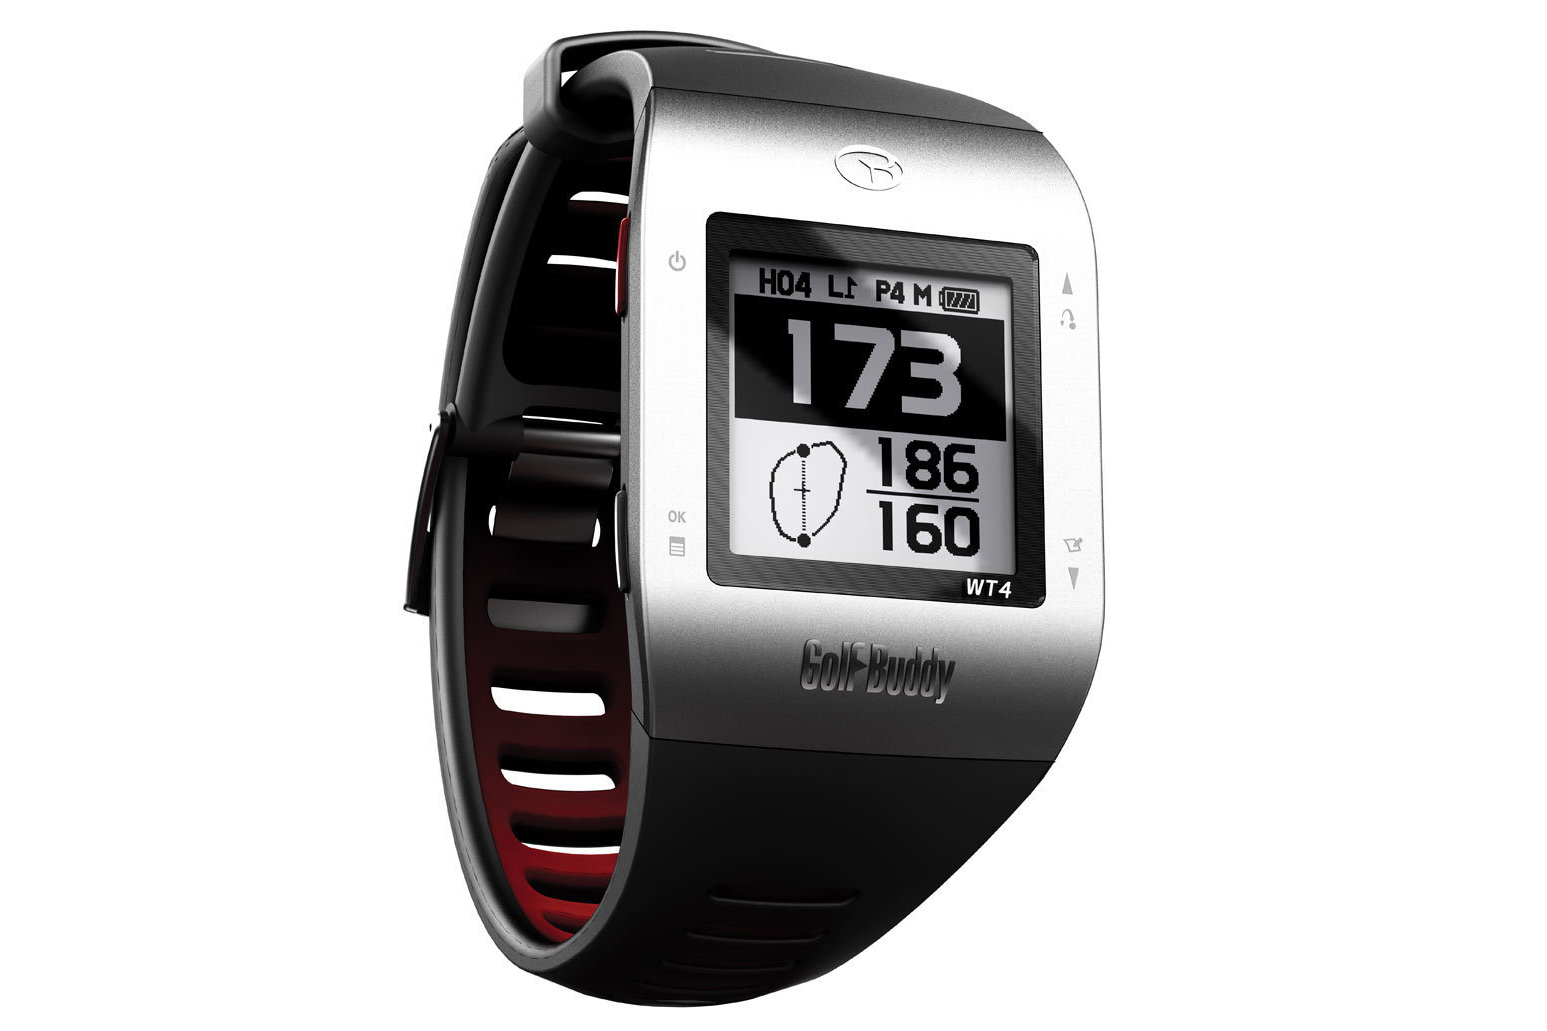 The GolfBuddy WT4 GPS watch is a sleek, stylish and strong offering